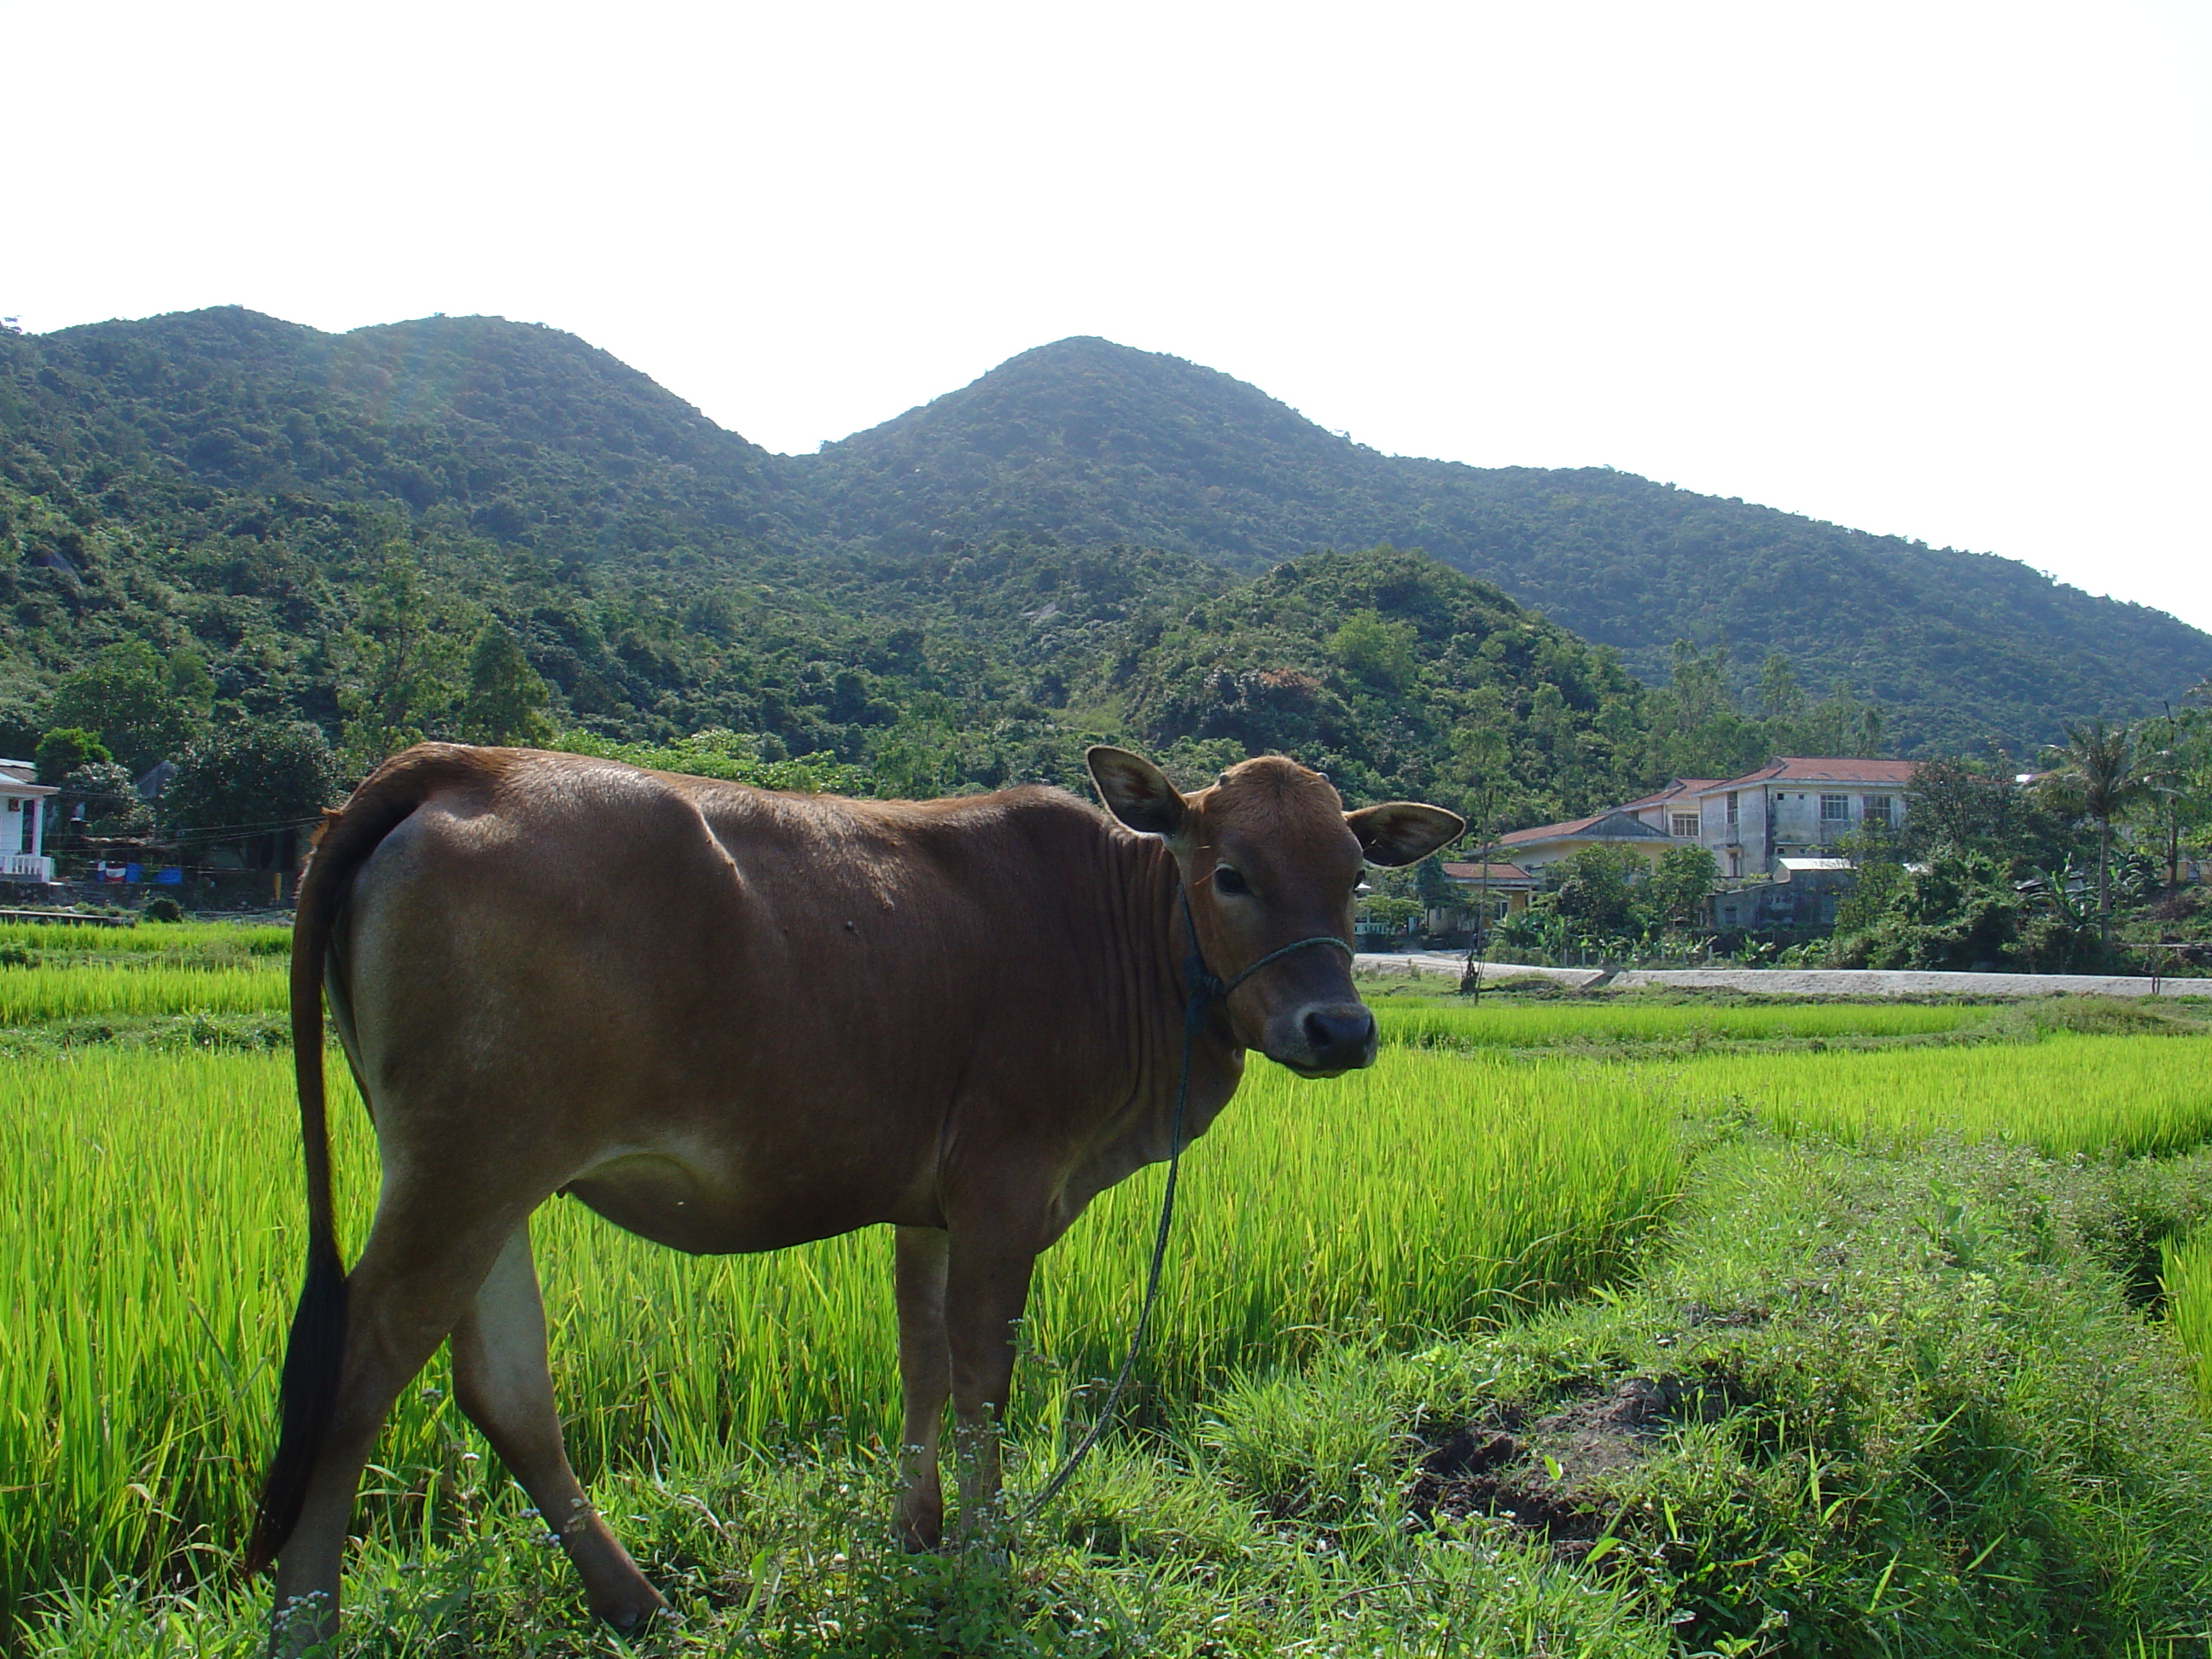 A cow next to a rice field.